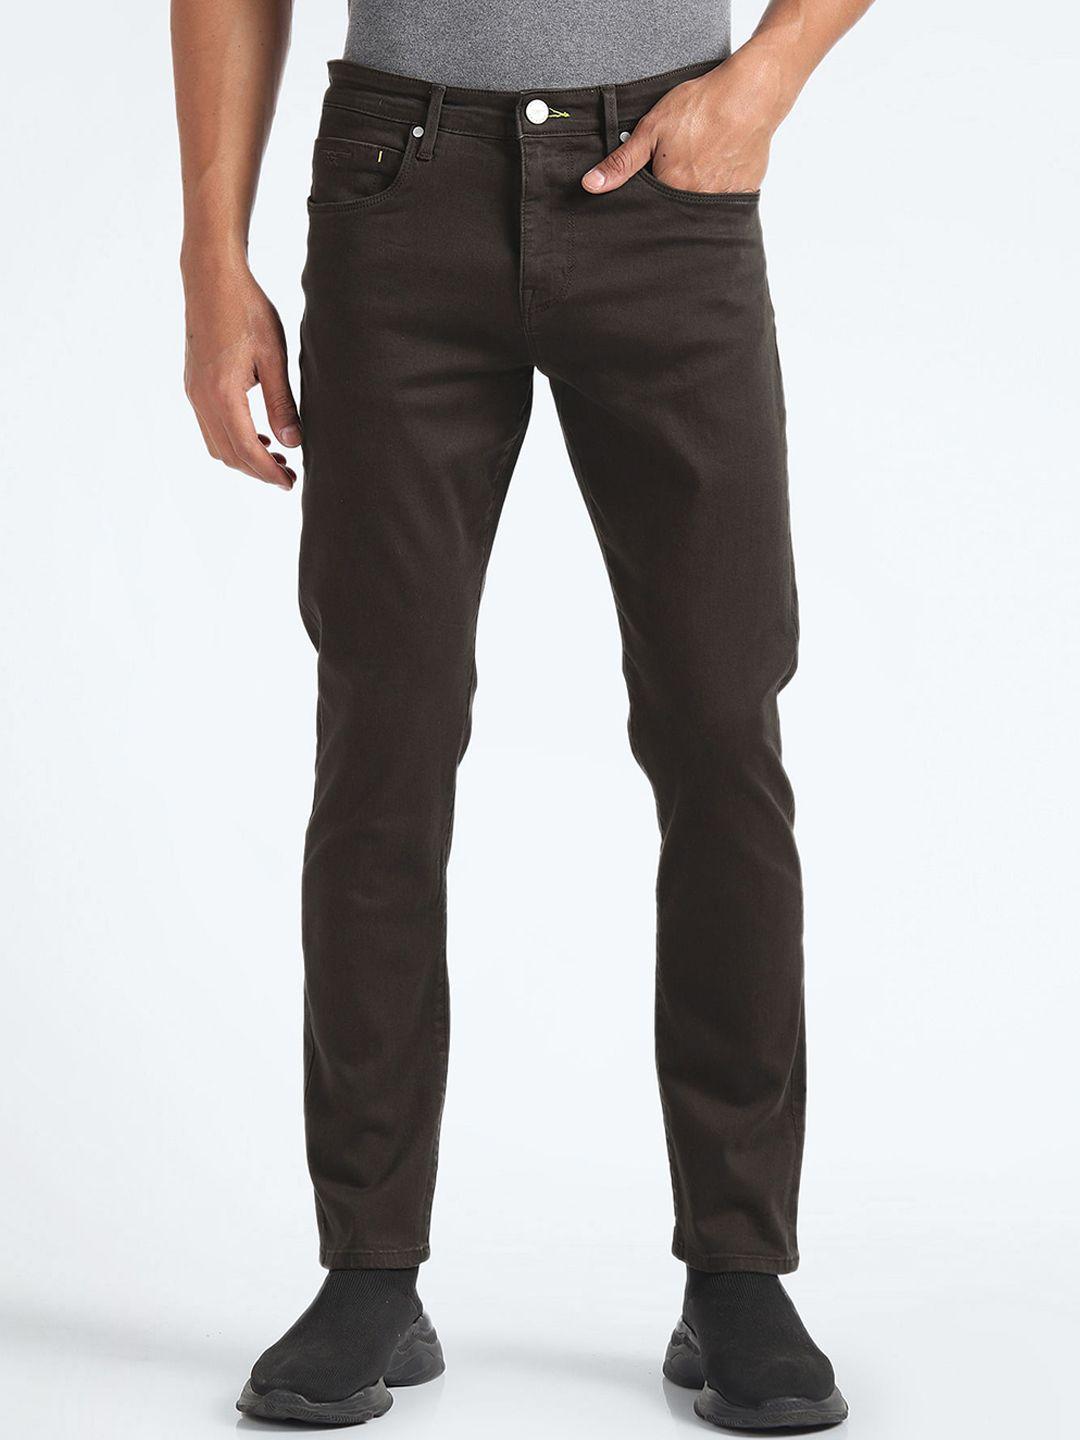 flying-machine-men-tapered-fit-mid-rise-clean-look-stretchable-jeans